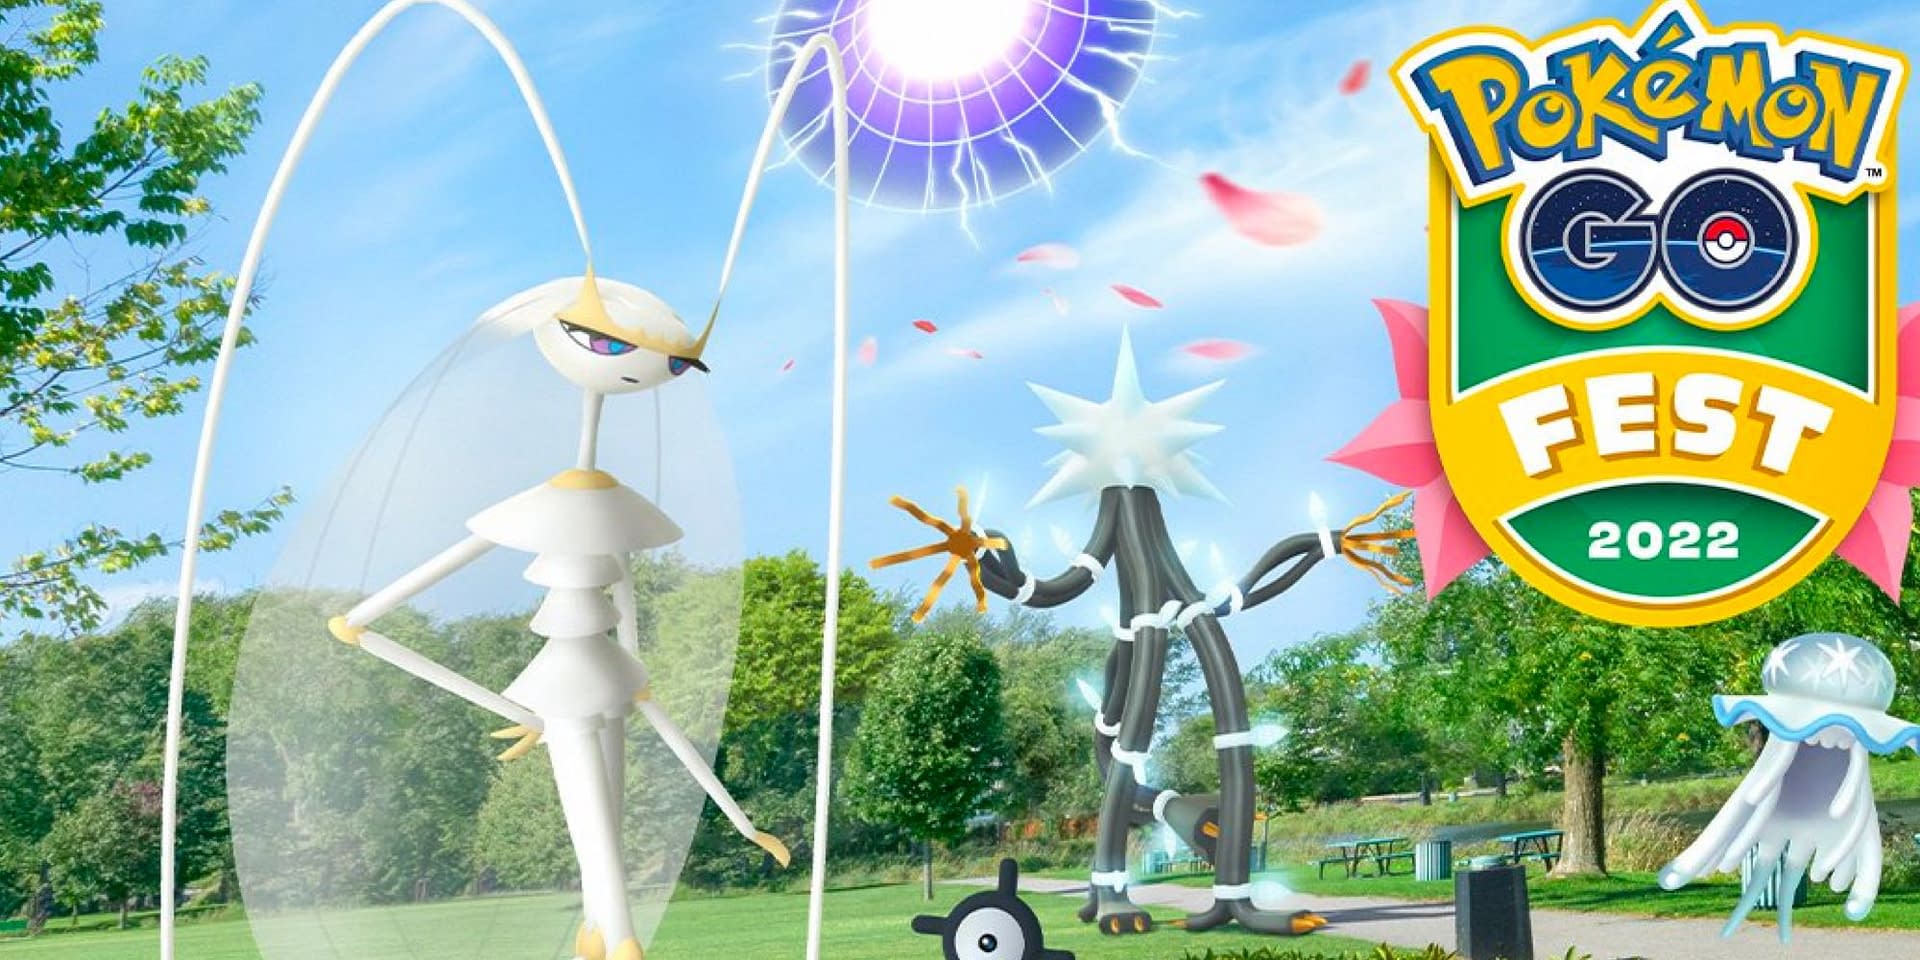 Pokemon Go Pheromosa Raid Guide: Best Counters and Weaknesses - CNET